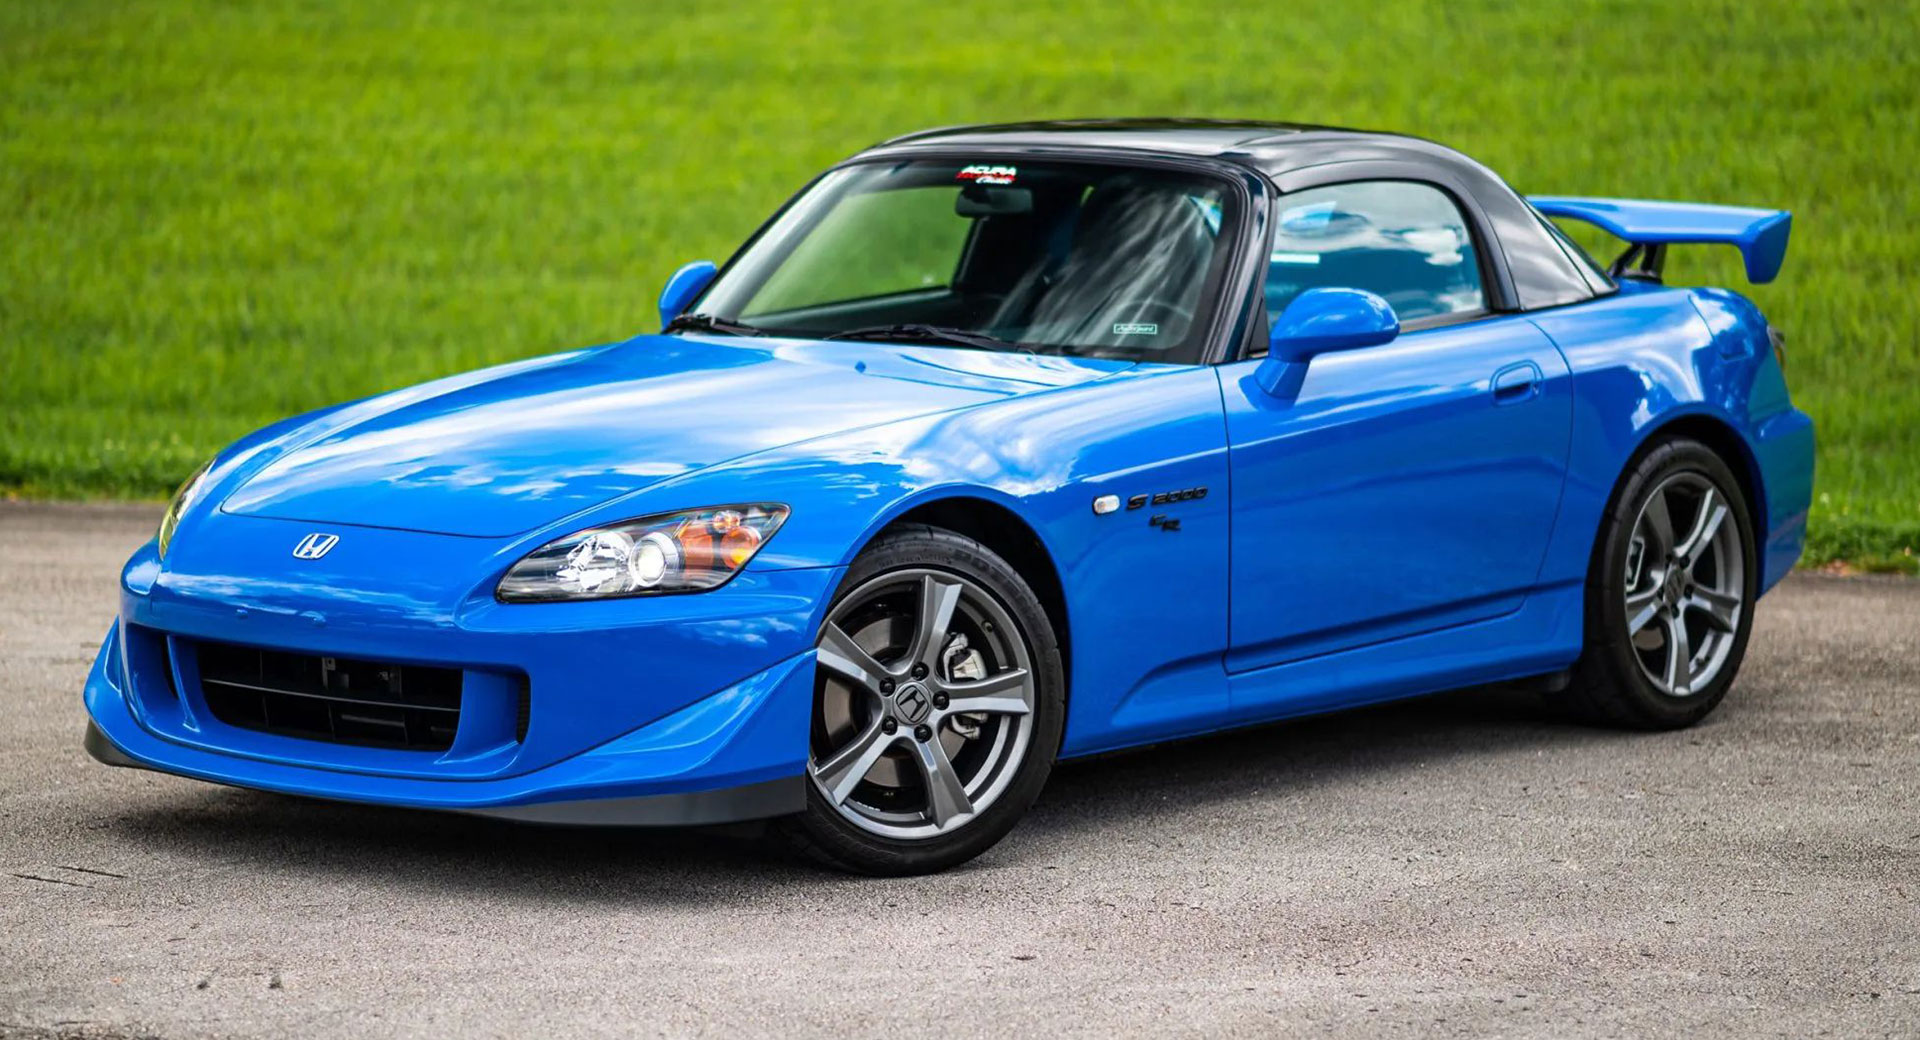 A 2008 Honda S2000 CR Sold For $125,000 Making It The Second Most Expensive  In BaT History | Carscoops